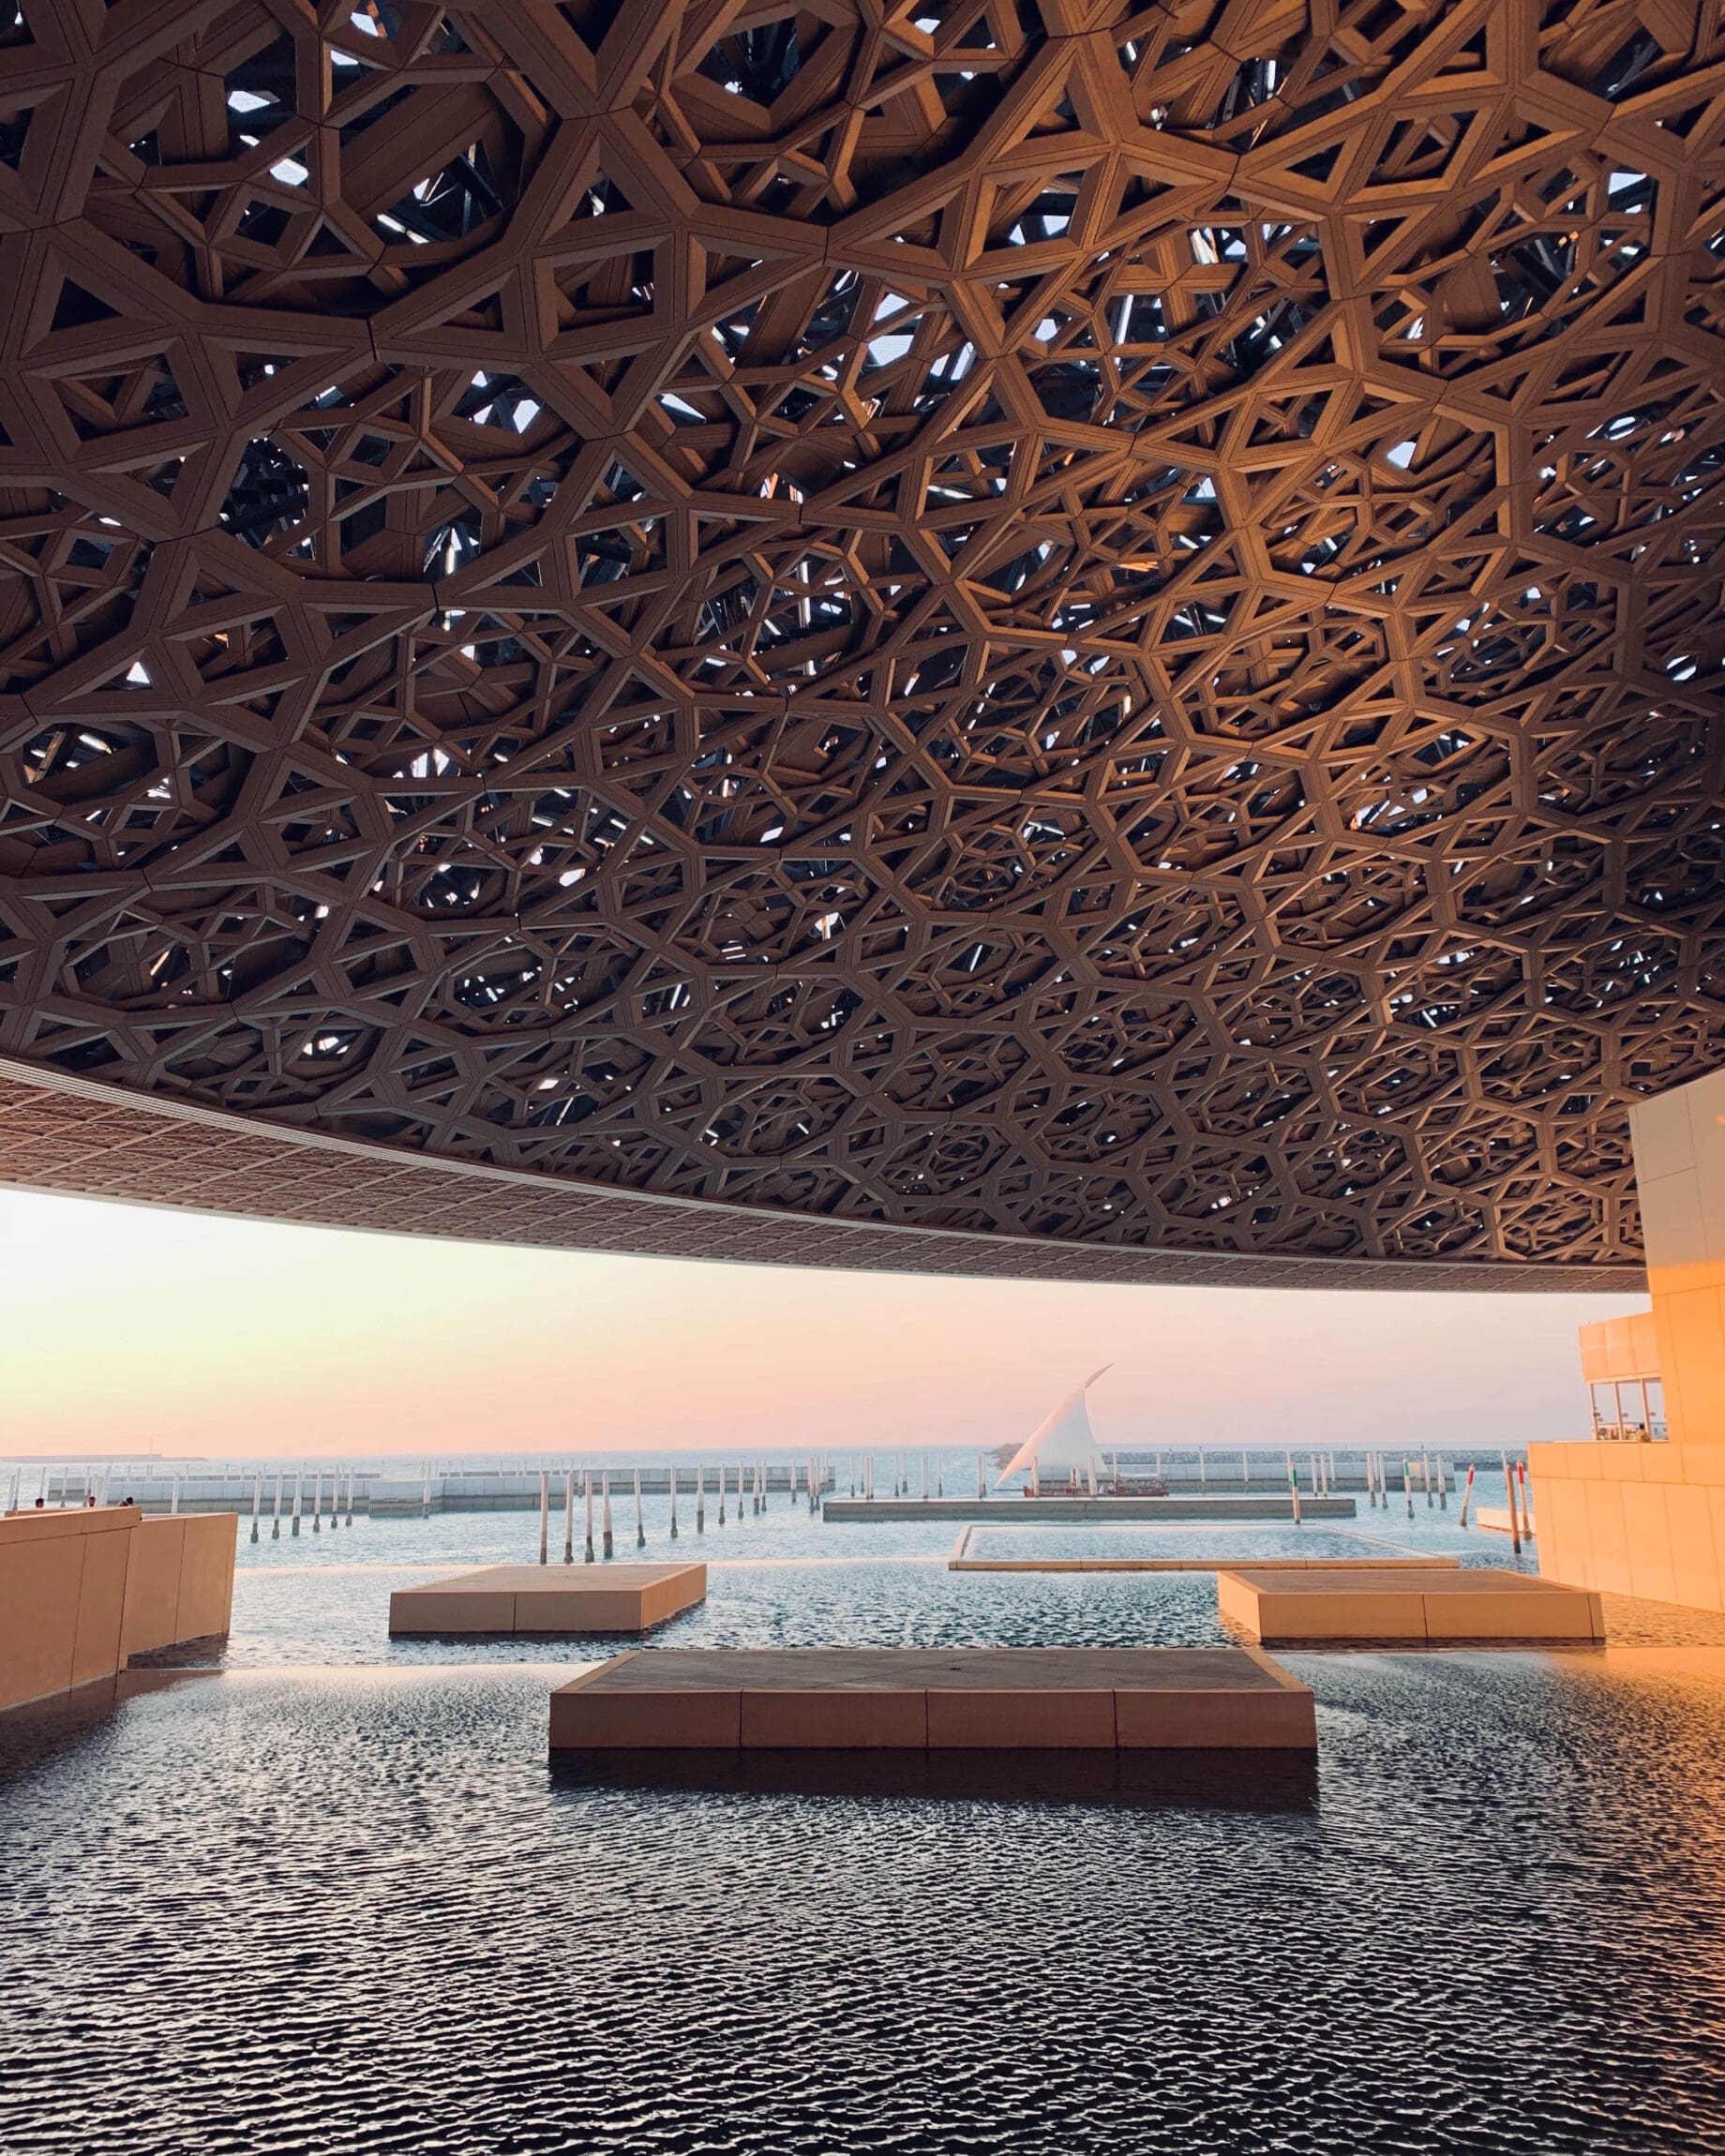 The best art galleries in Dubai | A detail of the laced dome that hangs over the Louvre Abu Dhabi